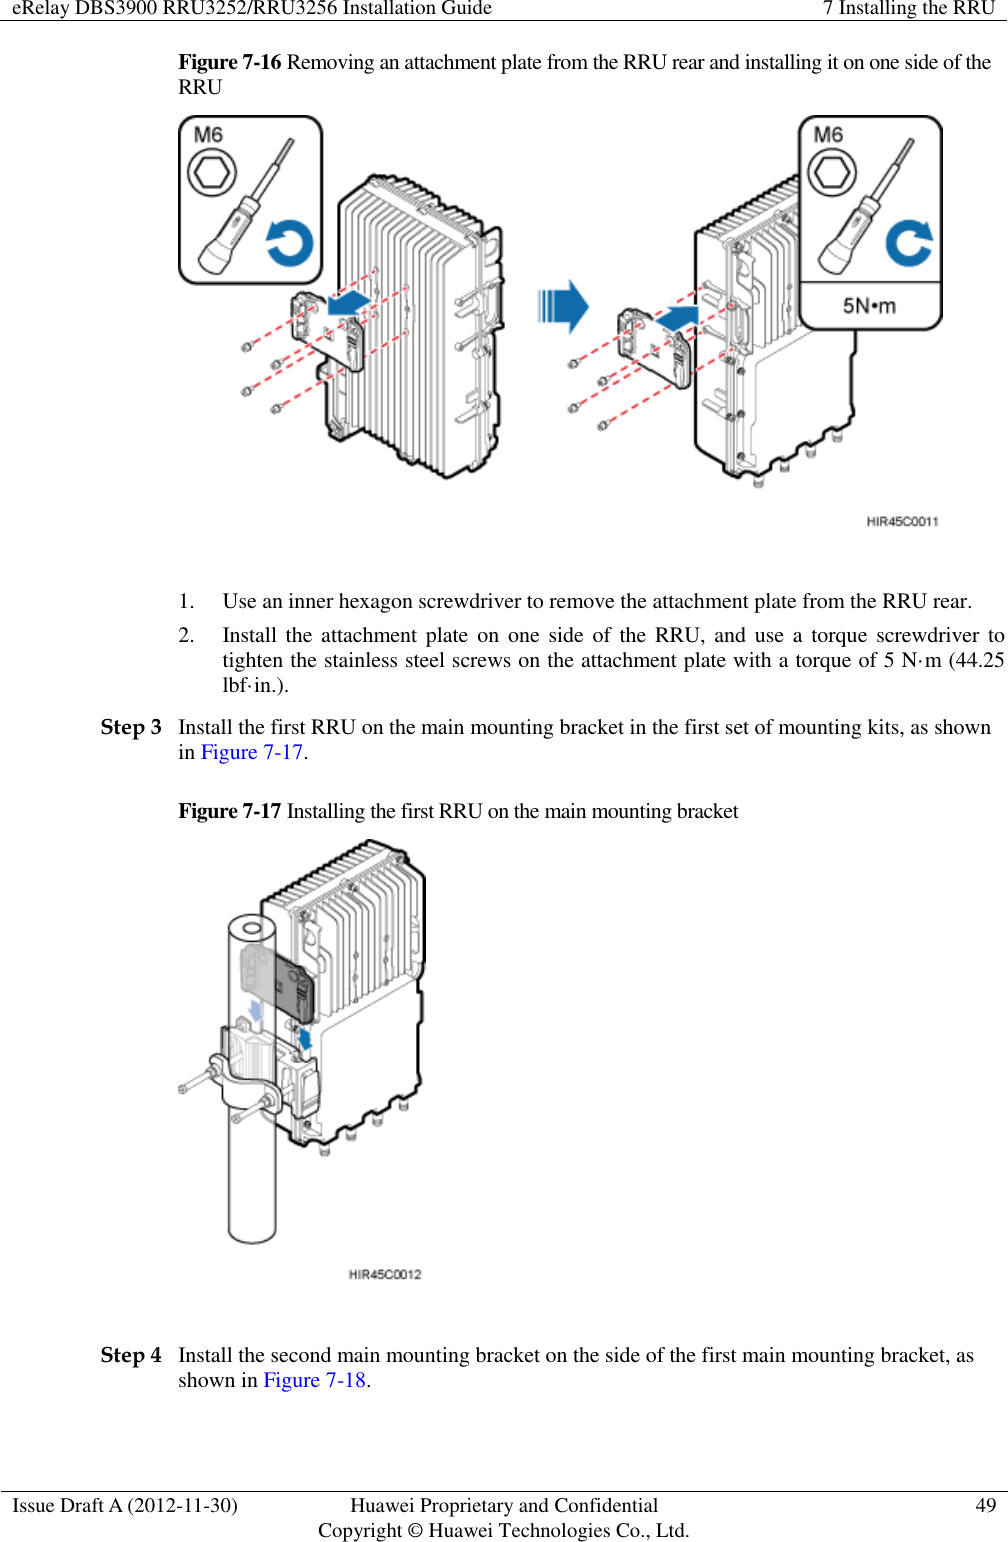 eRelay DBS3900 RRU3252/RRU3256 Installation Guide 7 Installing the RRU  Issue Draft A (2012-11-30) Huawei Proprietary and Confidential                                     Copyright © Huawei Technologies Co., Ltd. 49  Figure 7-16 Removing an attachment plate from the RRU rear and installing it on one side of the RRU   1. Use an inner hexagon screwdriver to remove the attachment plate from the RRU rear. 2. Install the attachment plate  on  one  side  of the RRU,  and  use a torque  screwdriver to tighten the stainless steel screws on the attachment plate with a torque of 5 N·m (44.25 lbf·in.). Step 3 Install the first RRU on the main mounting bracket in the first set of mounting kits, as shown in Figure 7-17. Figure 7-17 Installing the first RRU on the main mounting bracket   Step 4 Install the second main mounting bracket on the side of the first main mounting bracket, as shown in Figure 7-18. 